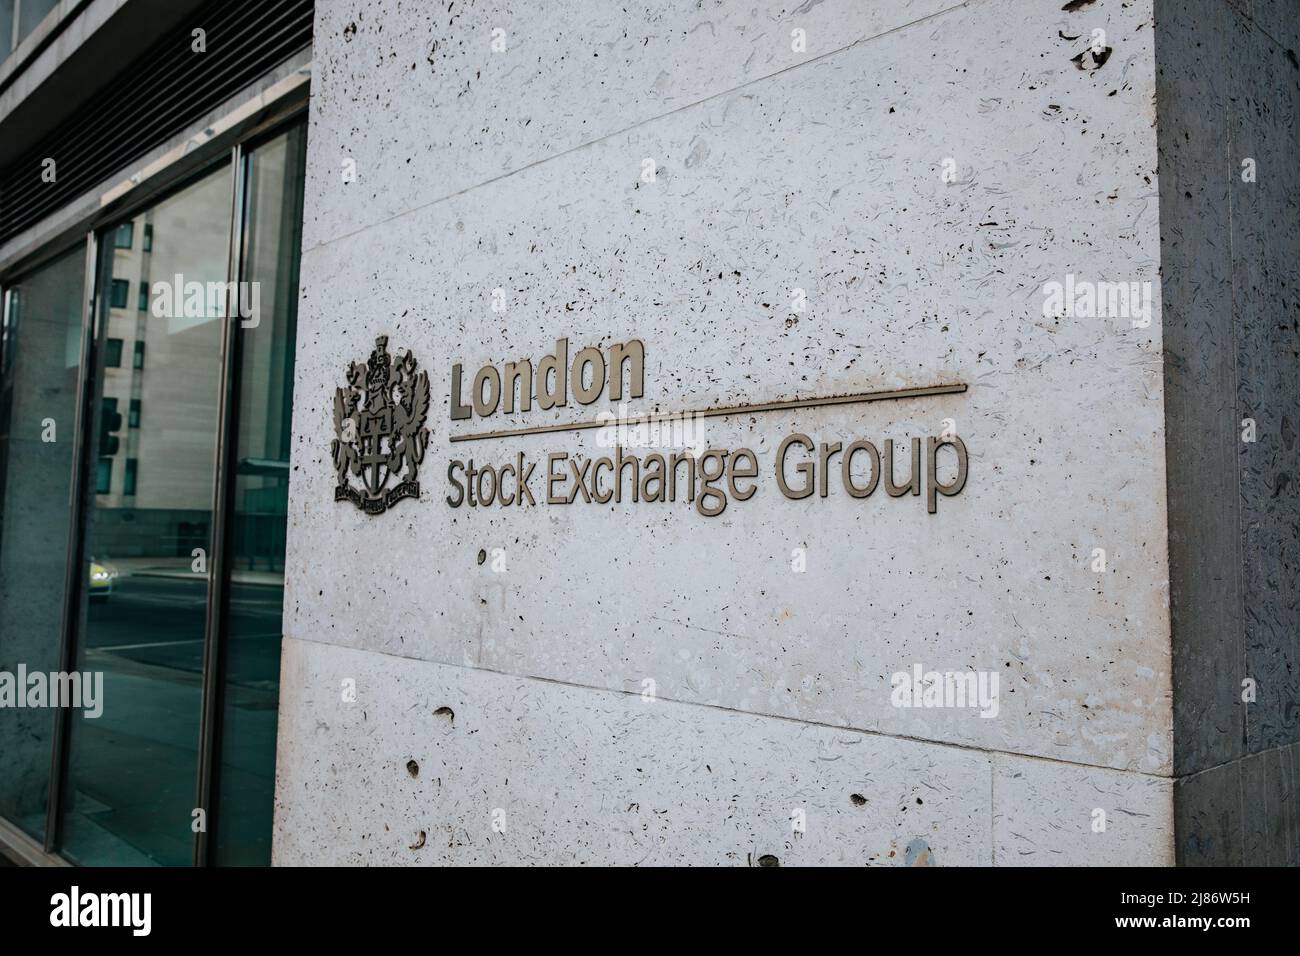 London stock Exchange Group Sign, Londres Banque D'Images